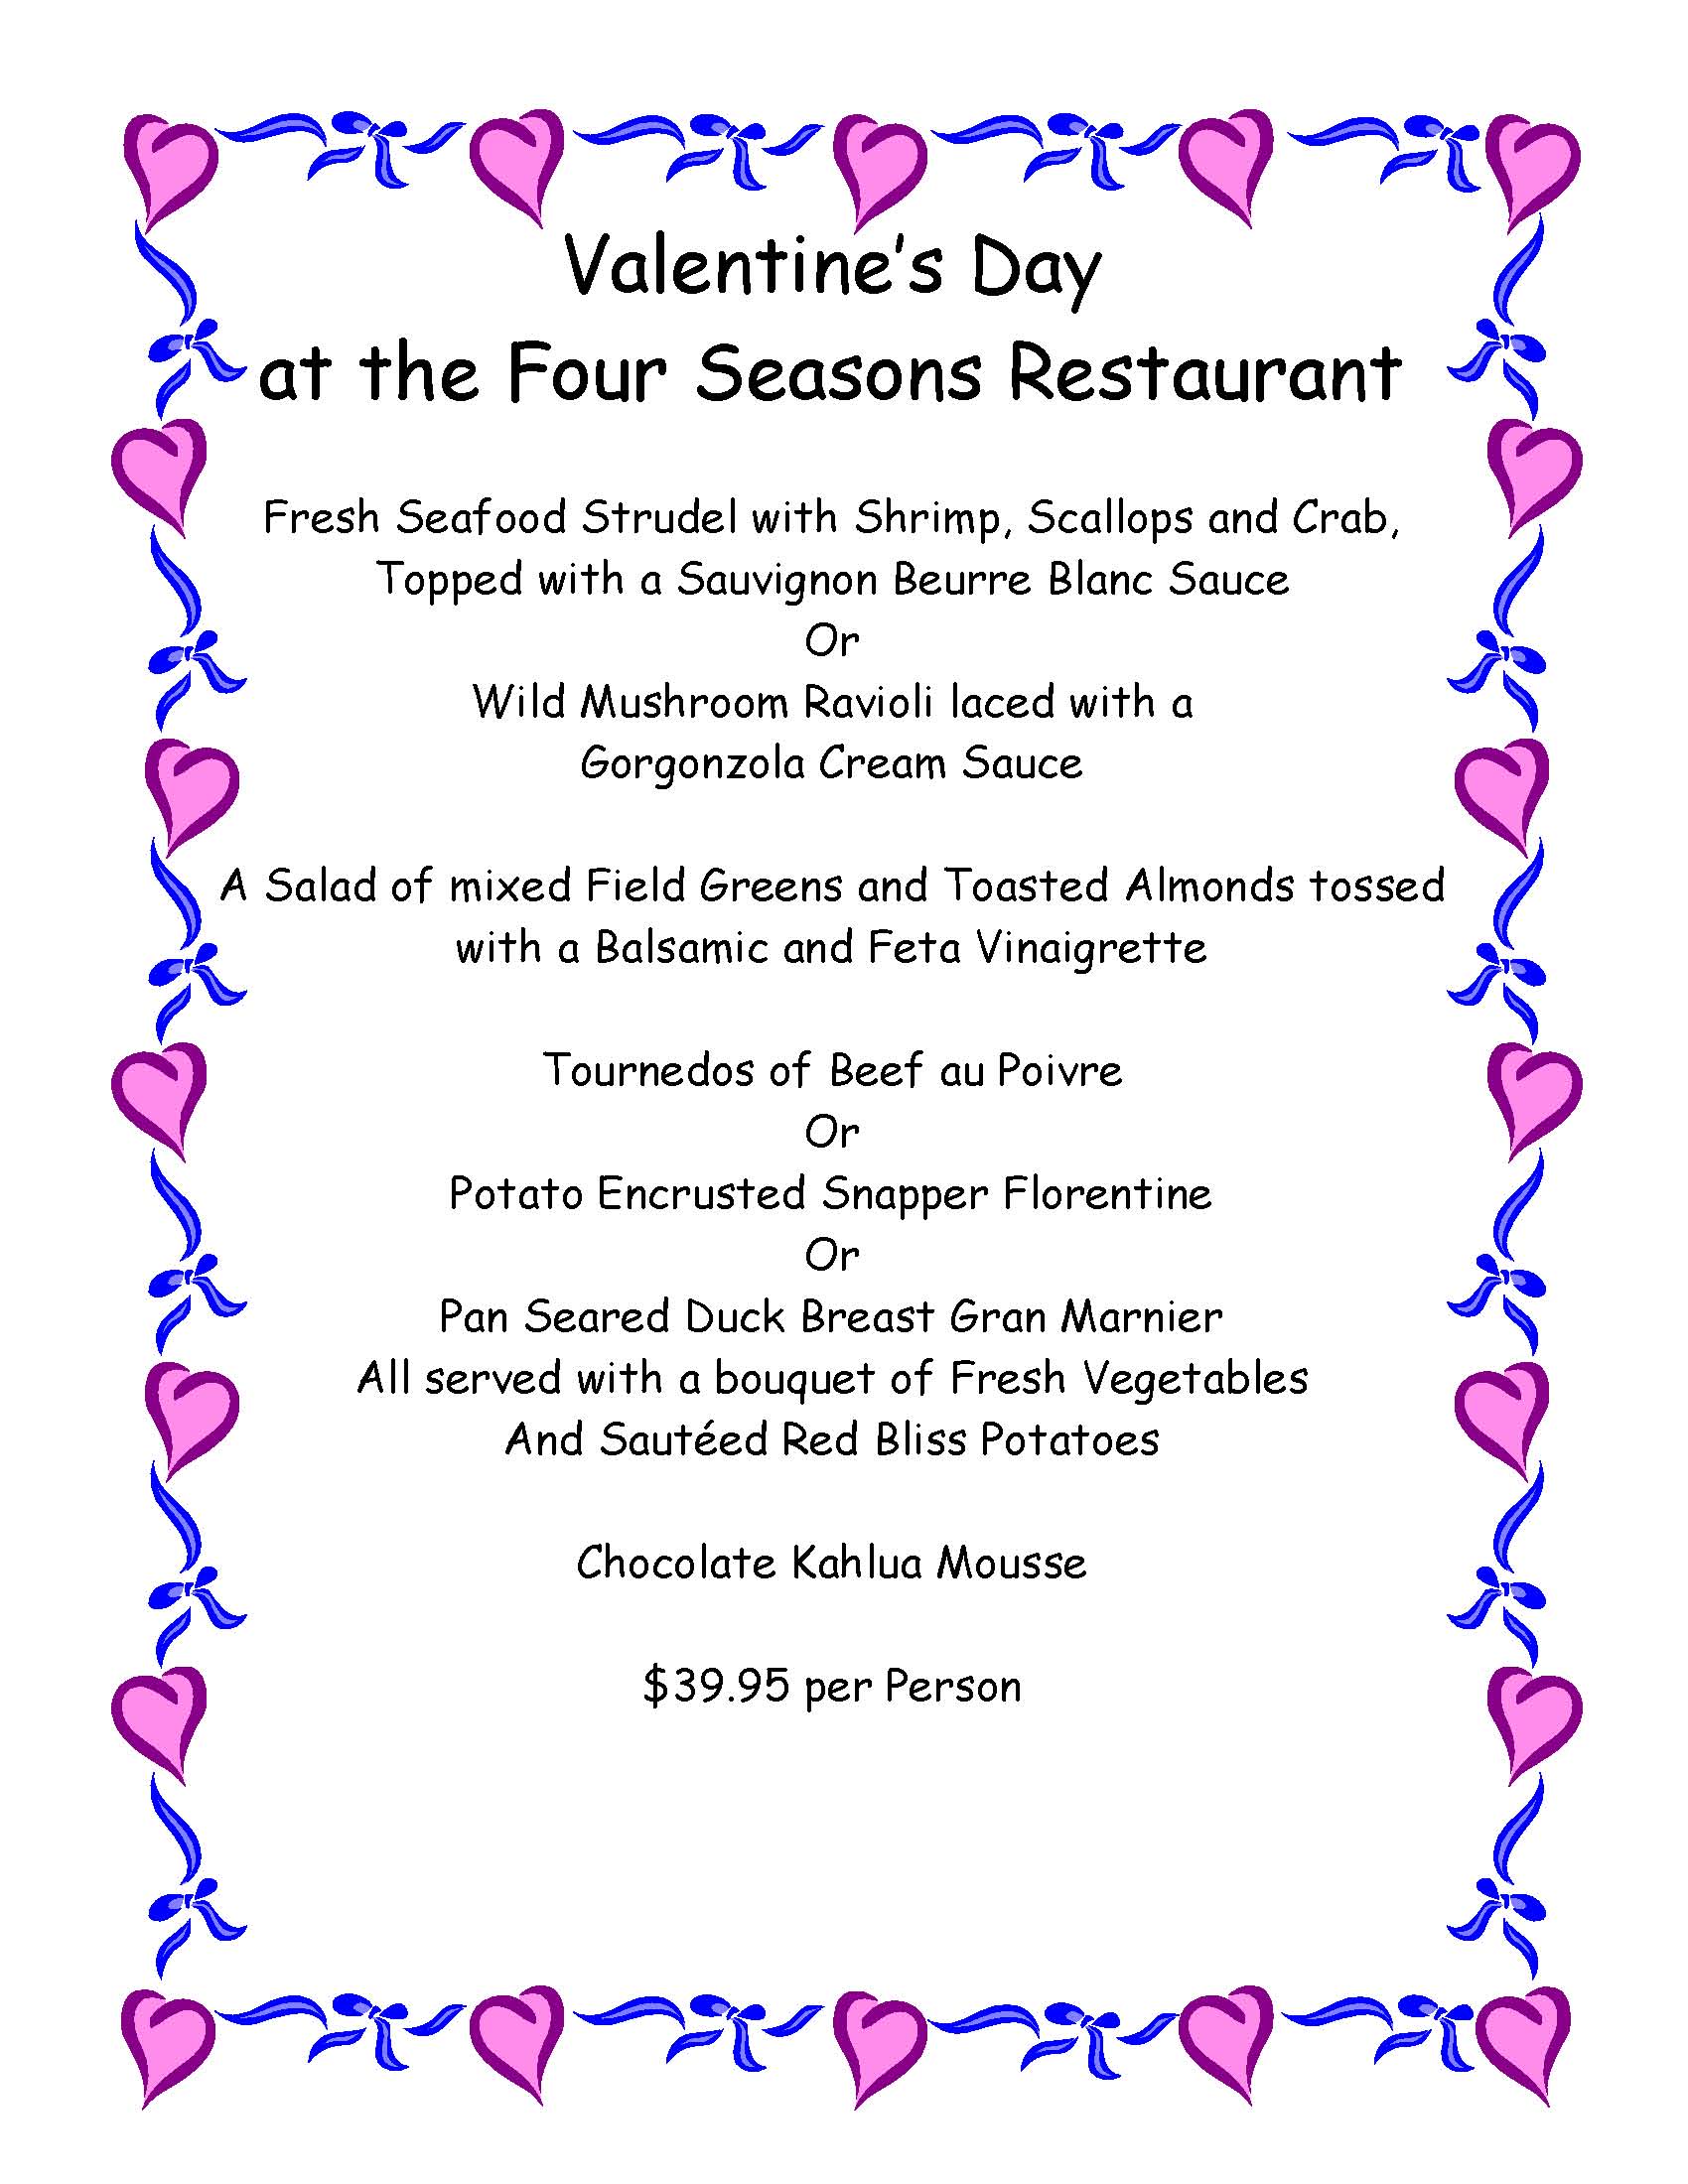 Myrtle Beach Valentine's Day Dining and Packages Myrtle Beach Hotels Blog